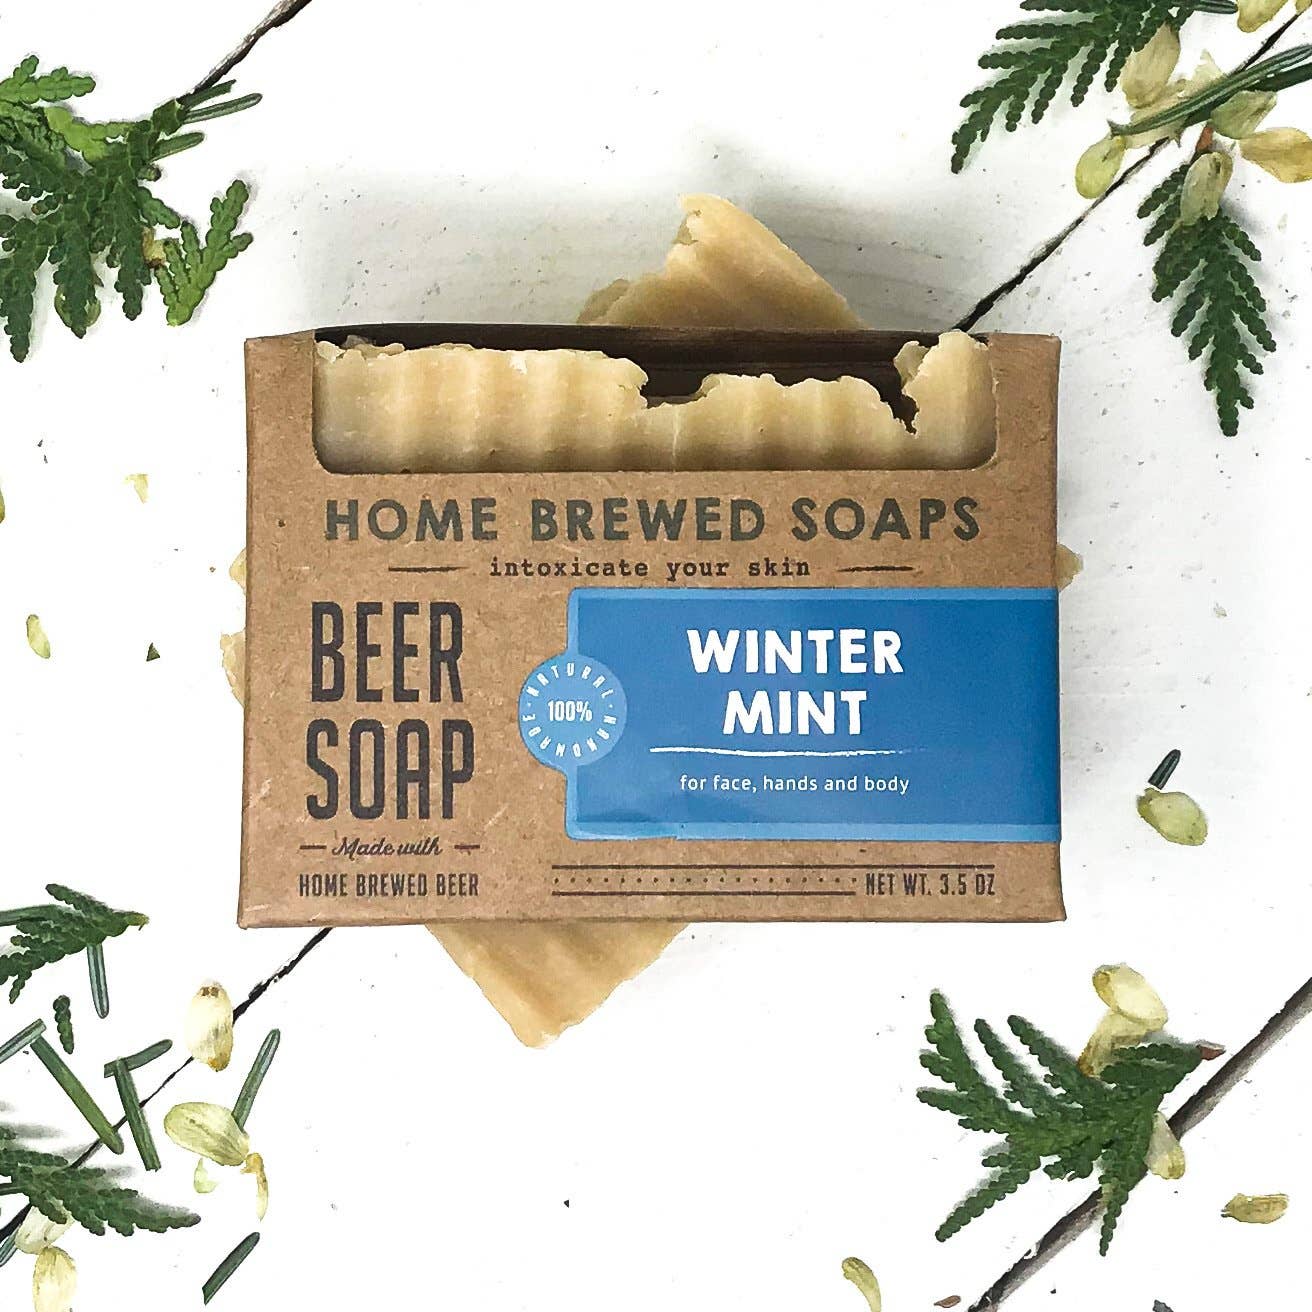 Winter Mint Beer Soap - Wiggle & Ding